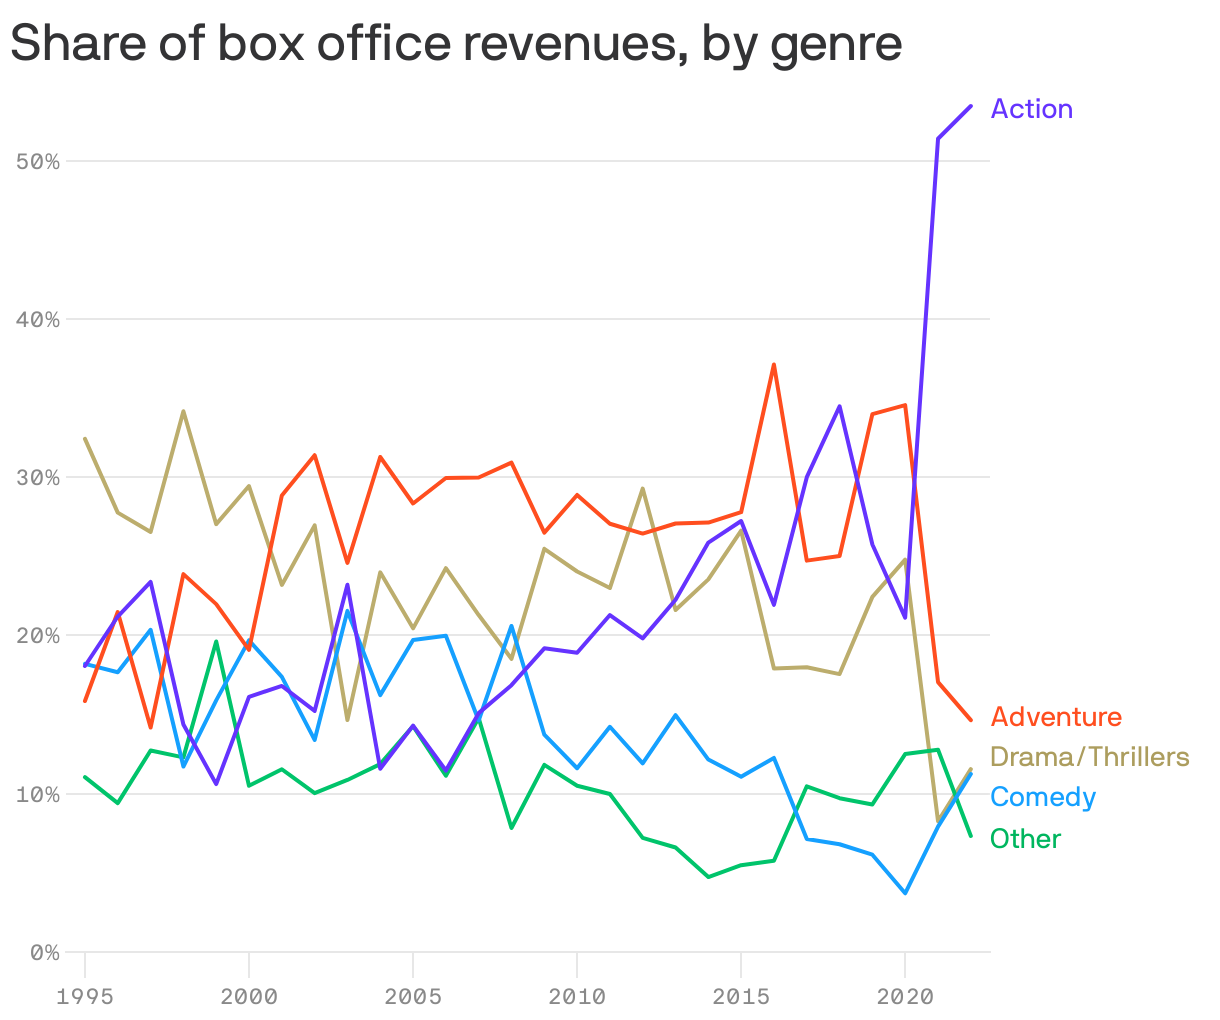 Share of box office revenues, by genre